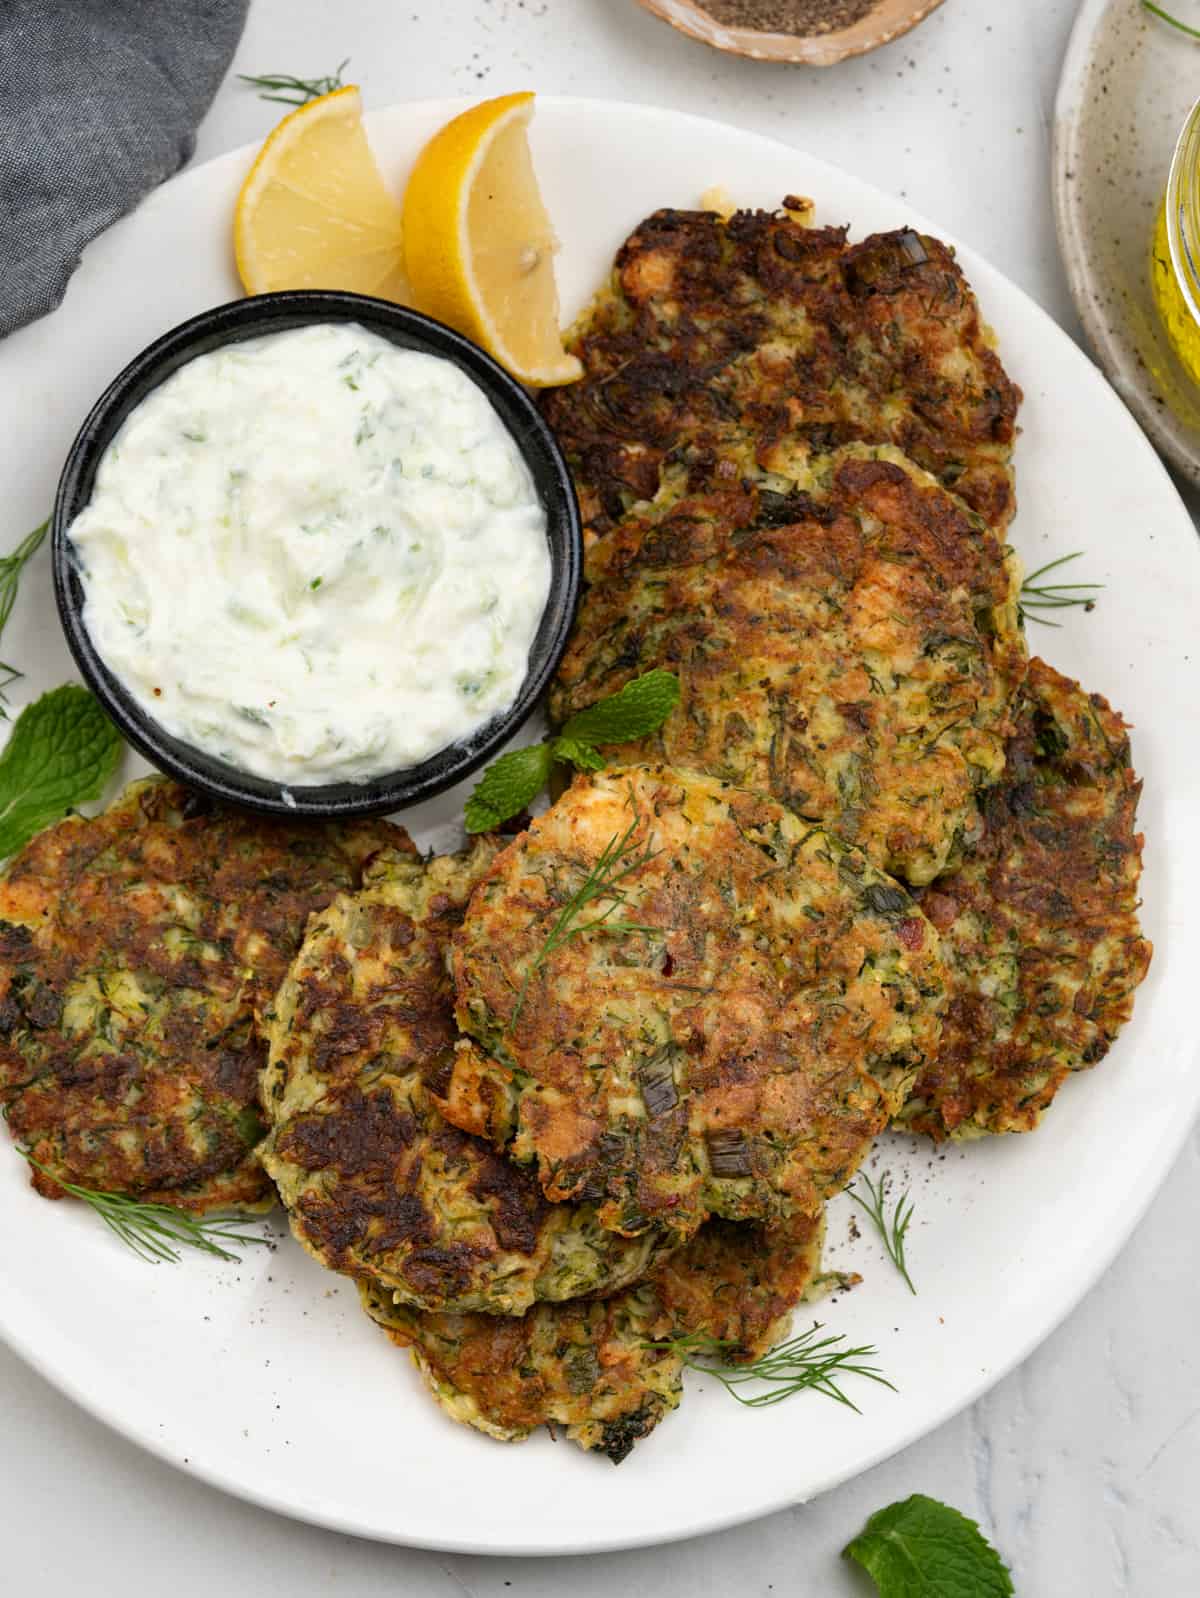 plate of Greek style Zucchini fritters served with tzatziki dip and lemon wedges